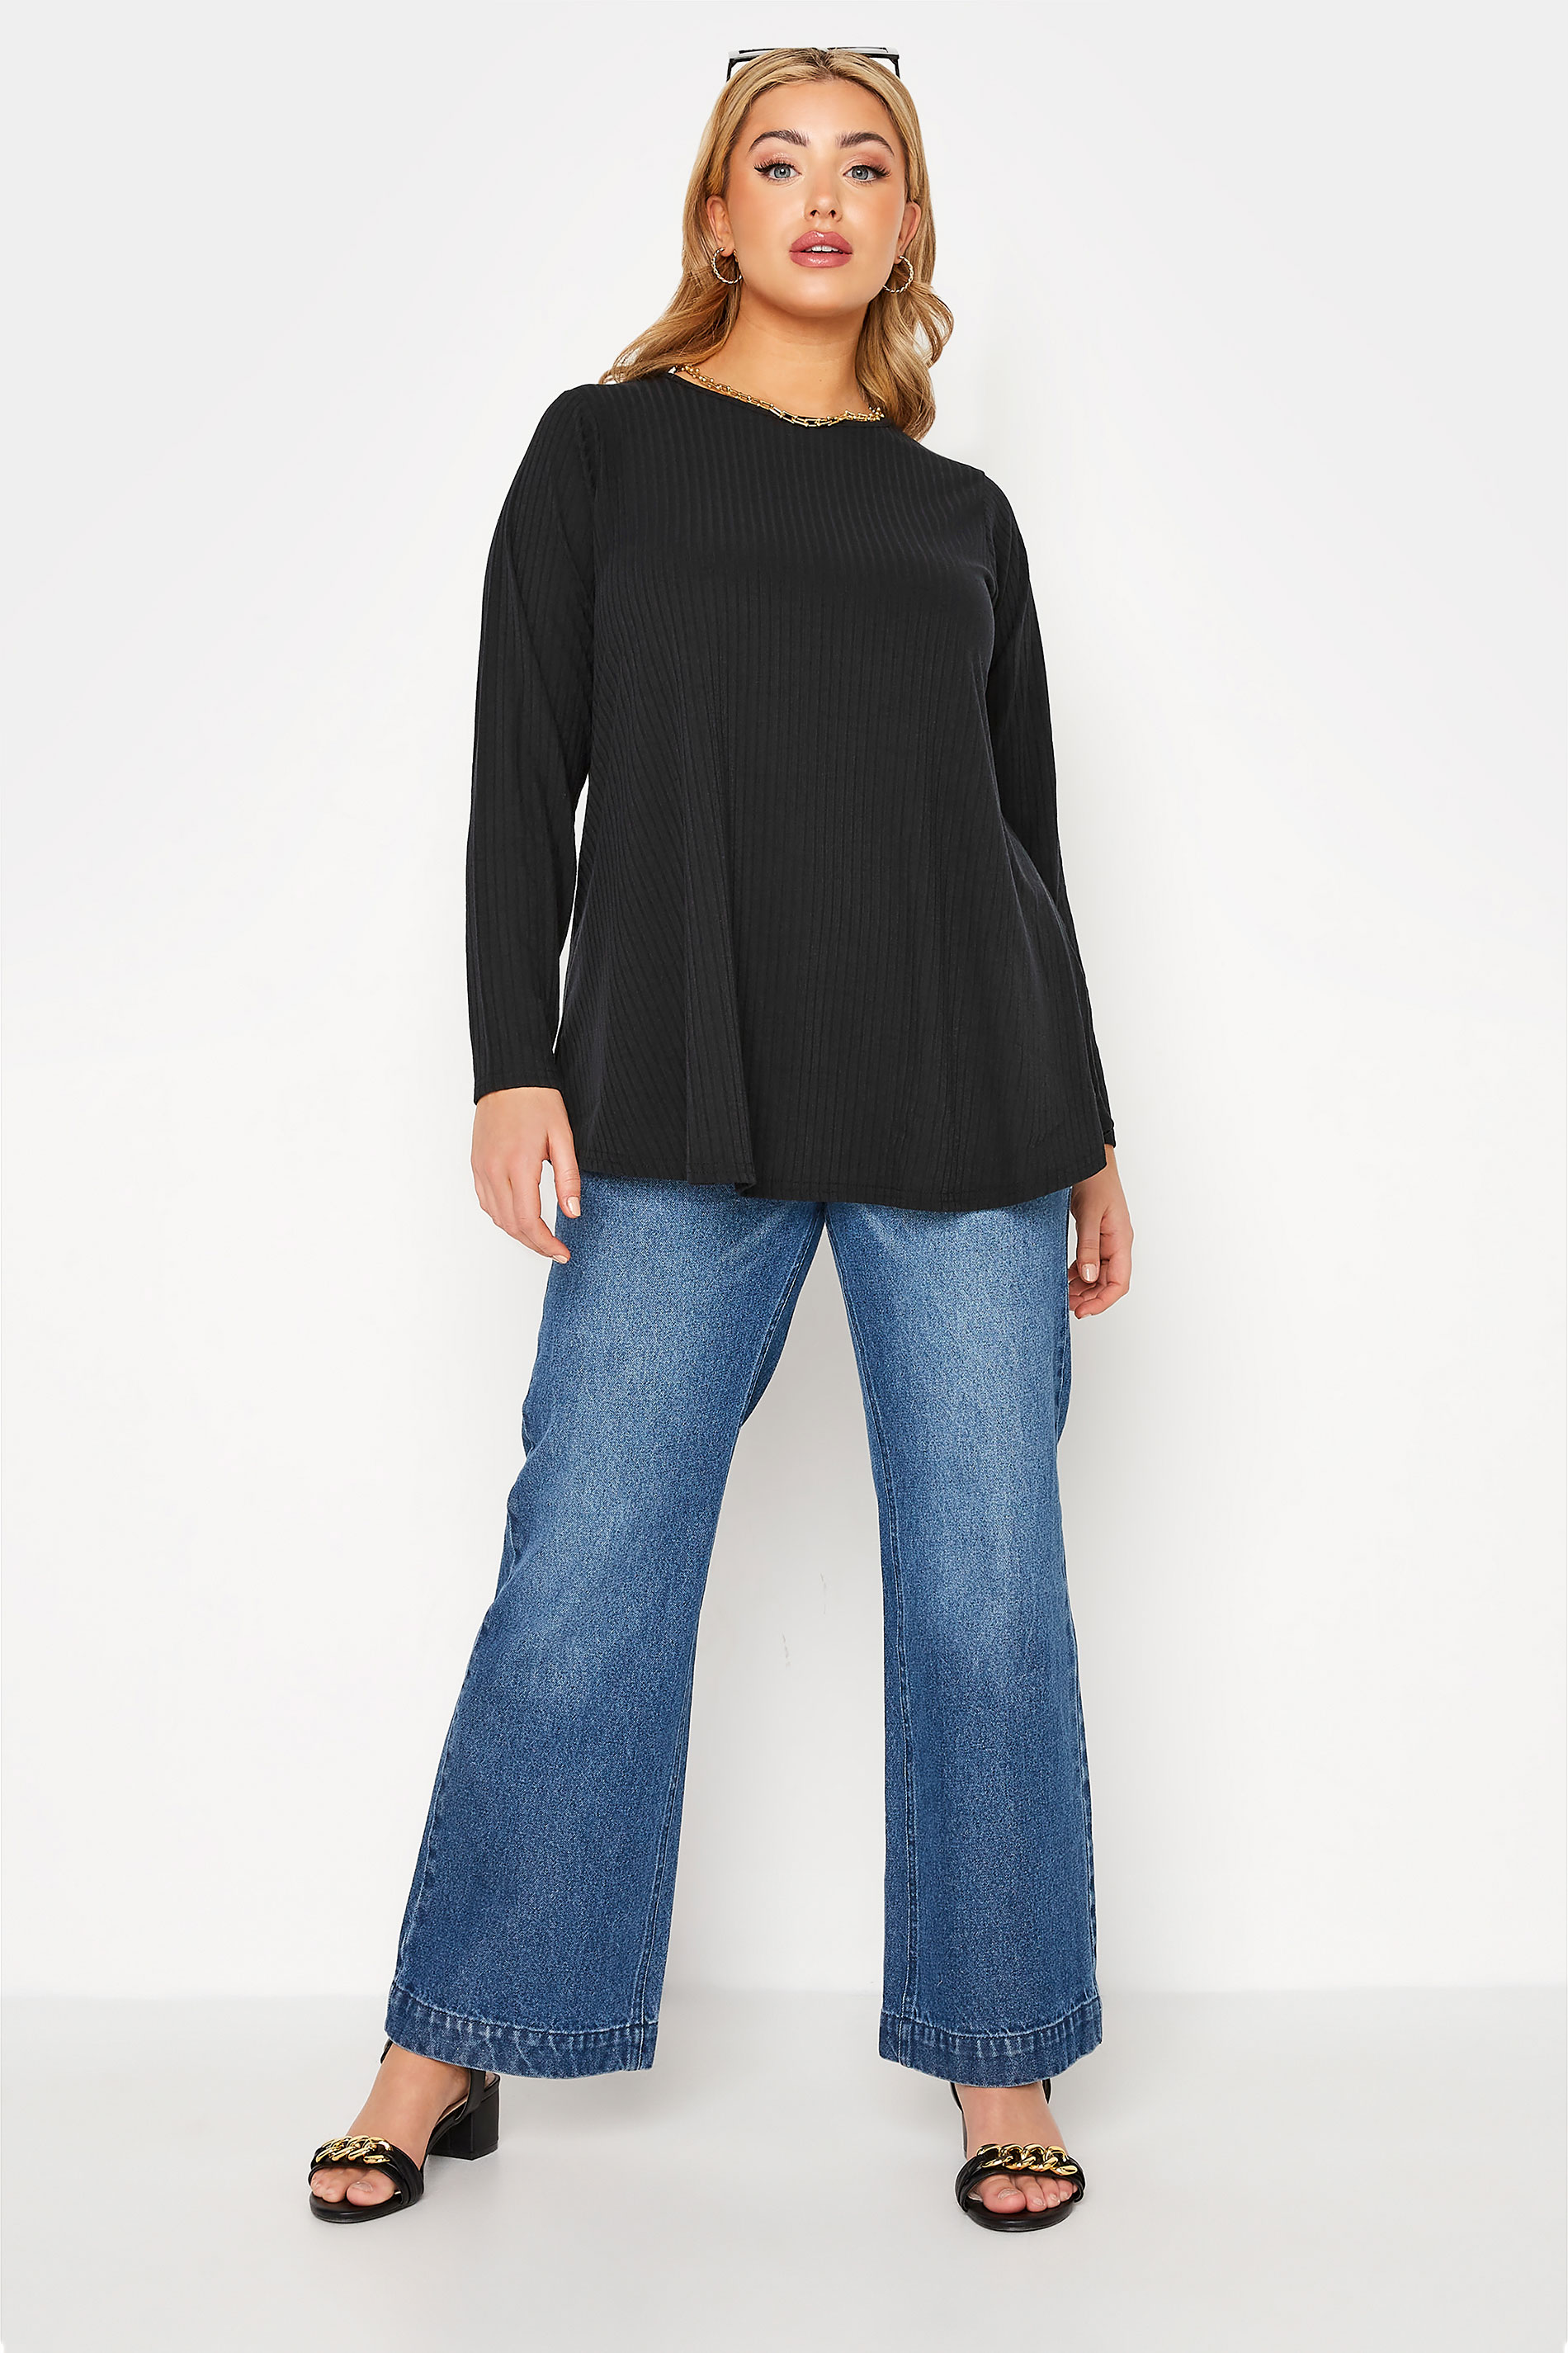 Grande taille  Tops Grande taille  Tops Jersey | LIMITED COLLECTION - Top Noir Nervuré Manches Longues - GI25896